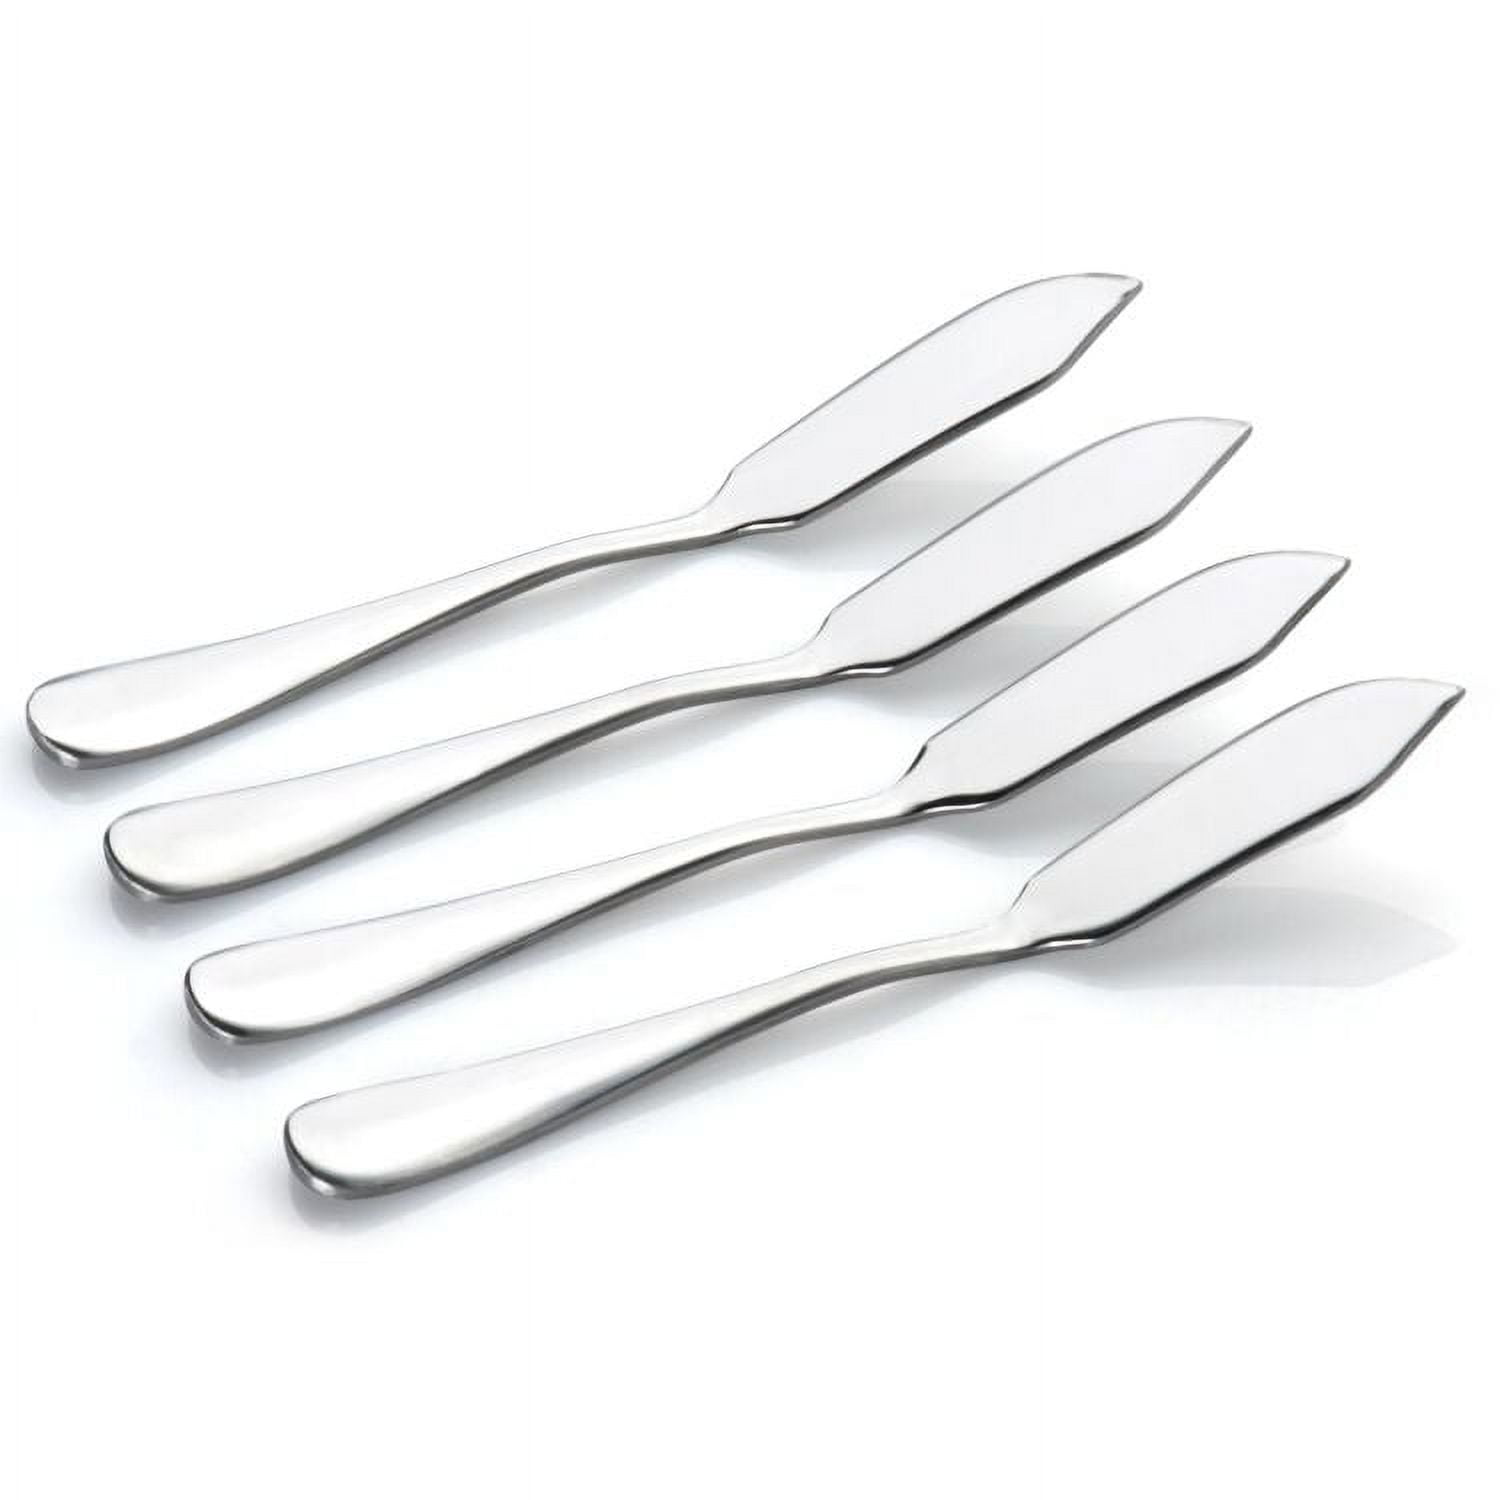 Butter Knife, Durable Stainless Steel Spreader Knife,Professional Cheese  Spreaders,Convenient Butter Knives-Butter Knife Spreader Set of 4 for  Breakfast/Butter/Cheese and Condiments 